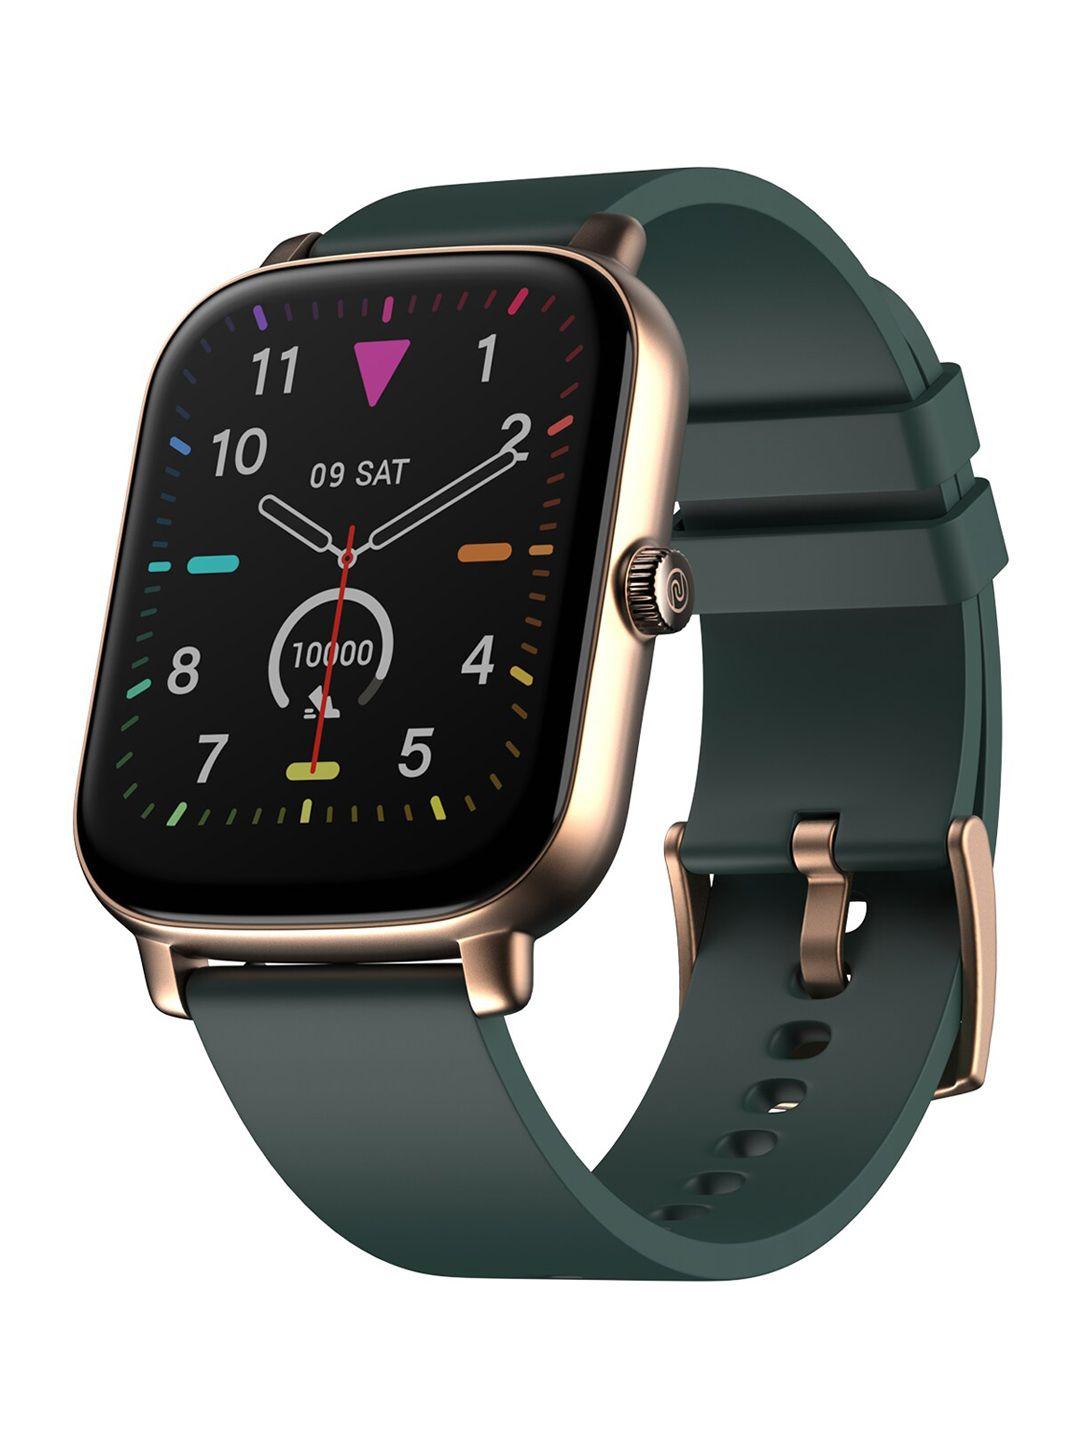 noise olive green colorfit icon buzz bluetooth calling smart watch with voice assistance